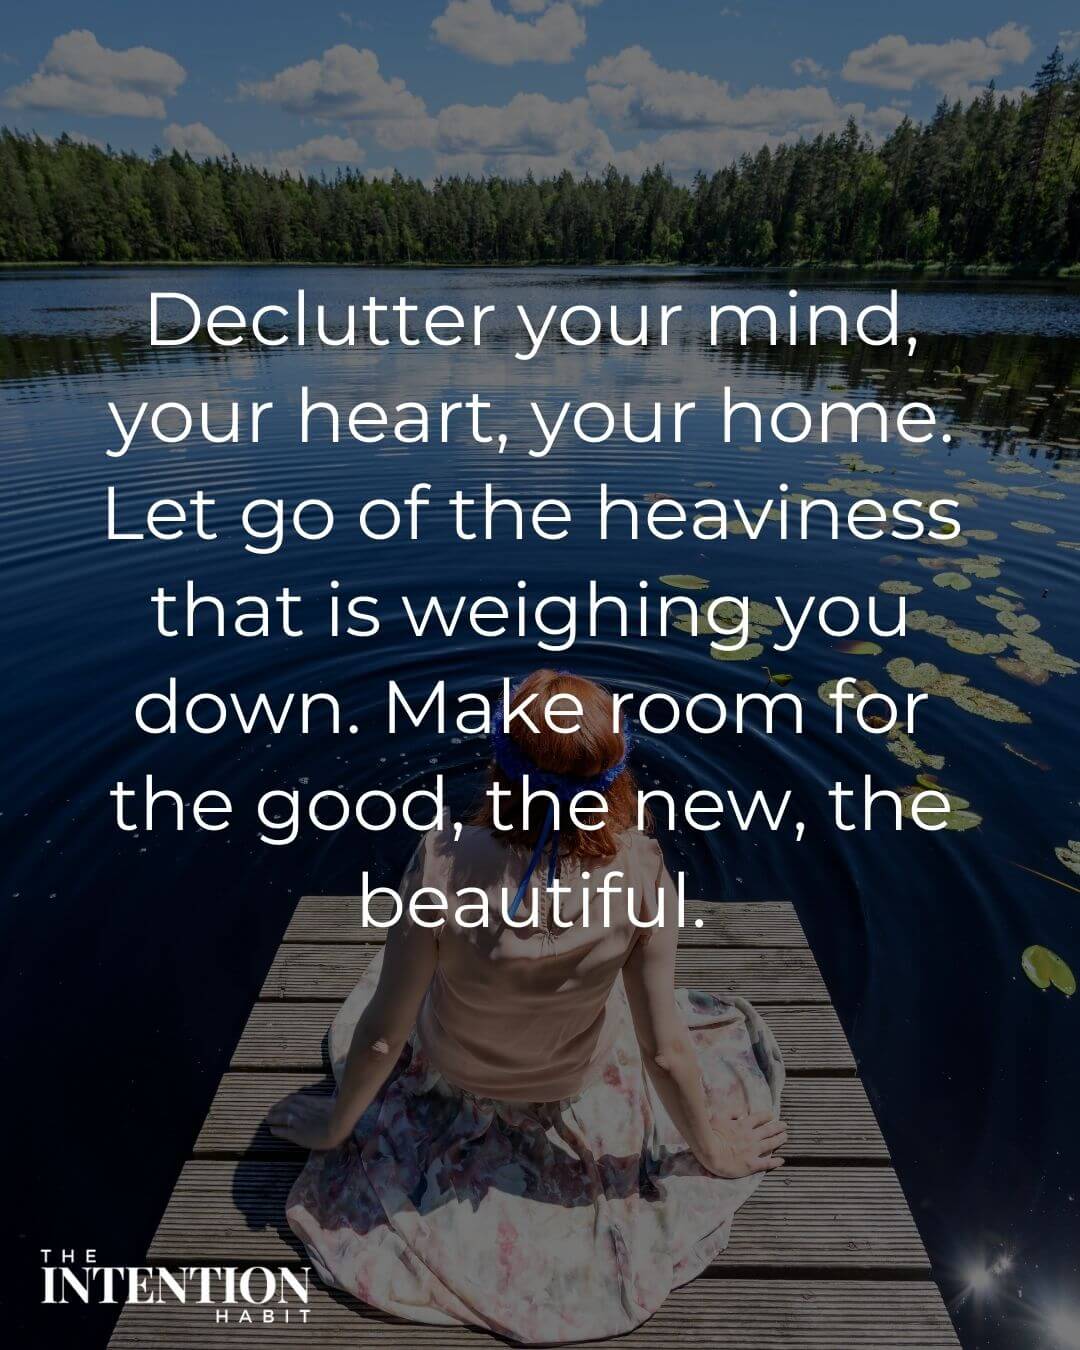 declutter your mind, your heart, your home. let go of the heaviness that is weighing you down, make room for the good, the new, the beautiful